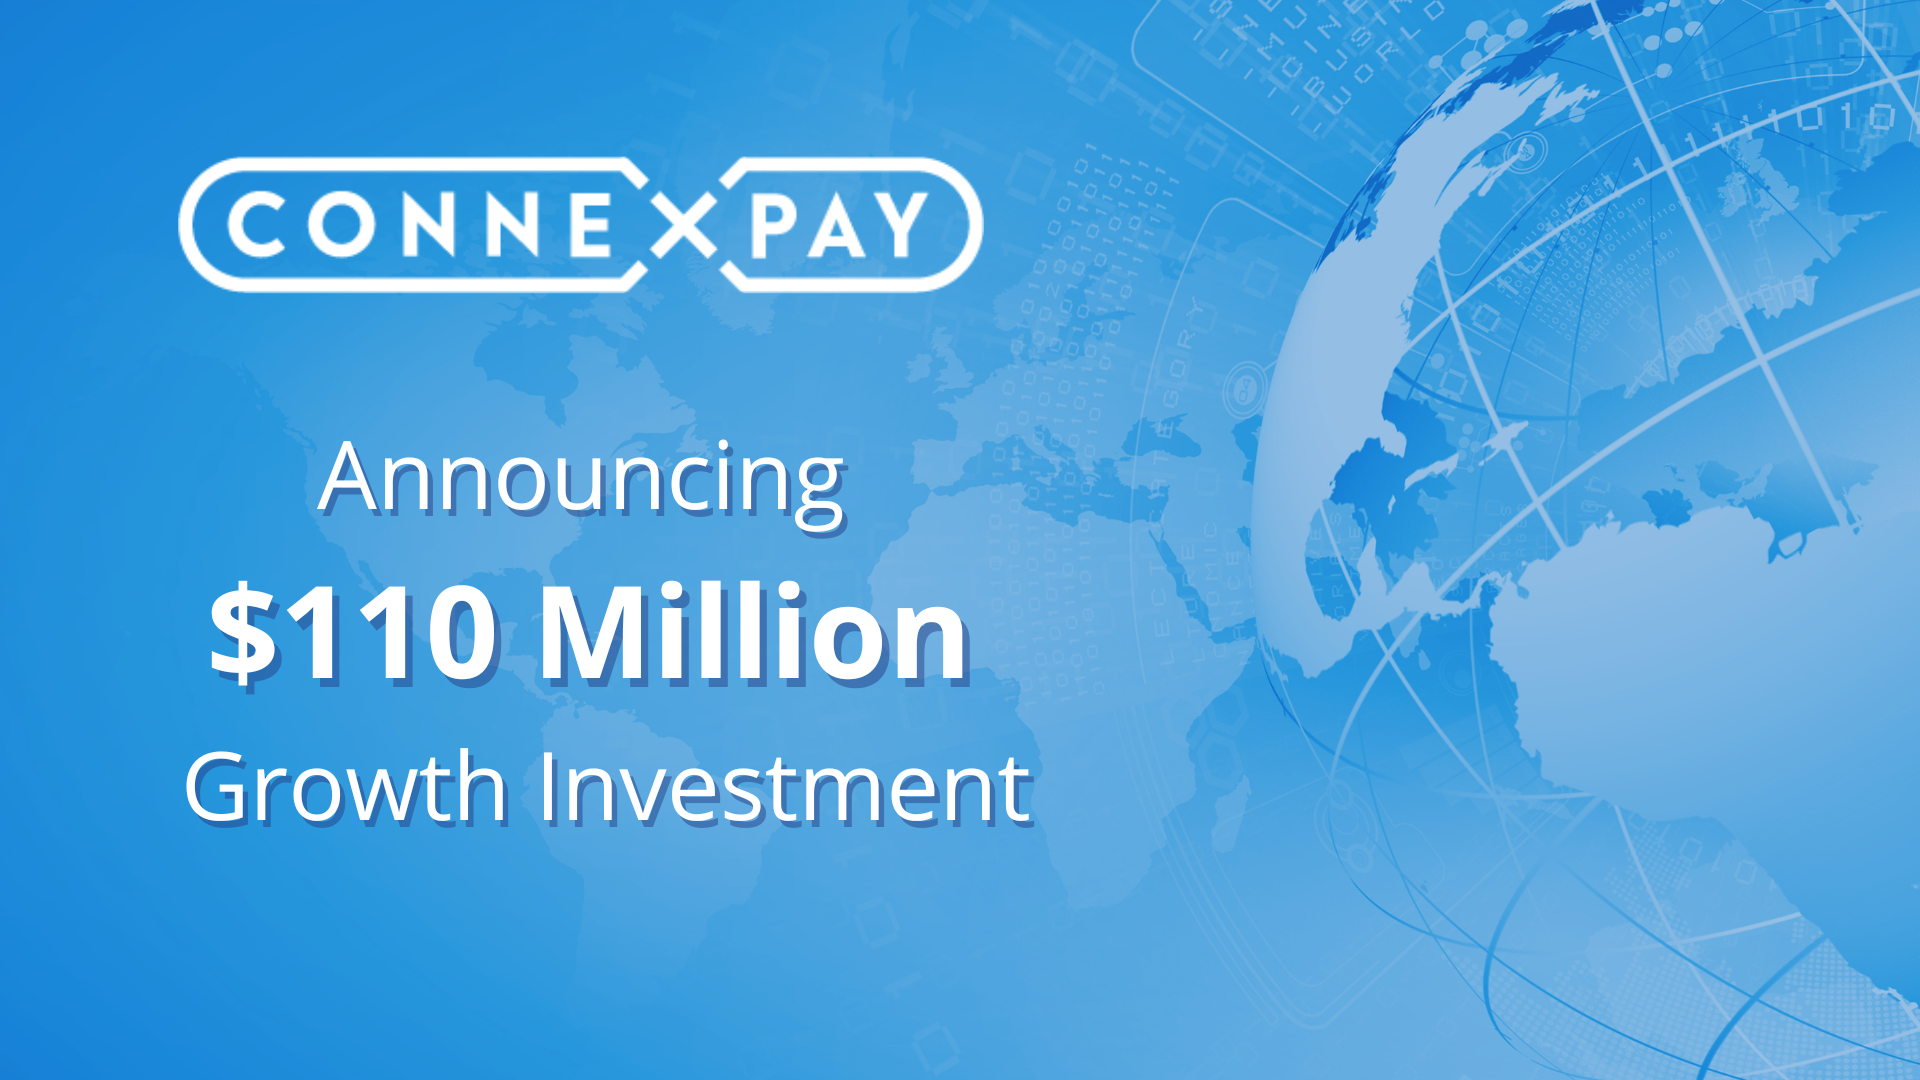 FTV Capital Leads $110 Million Growth Investment in ConnexPay (1920 × 1080 px)